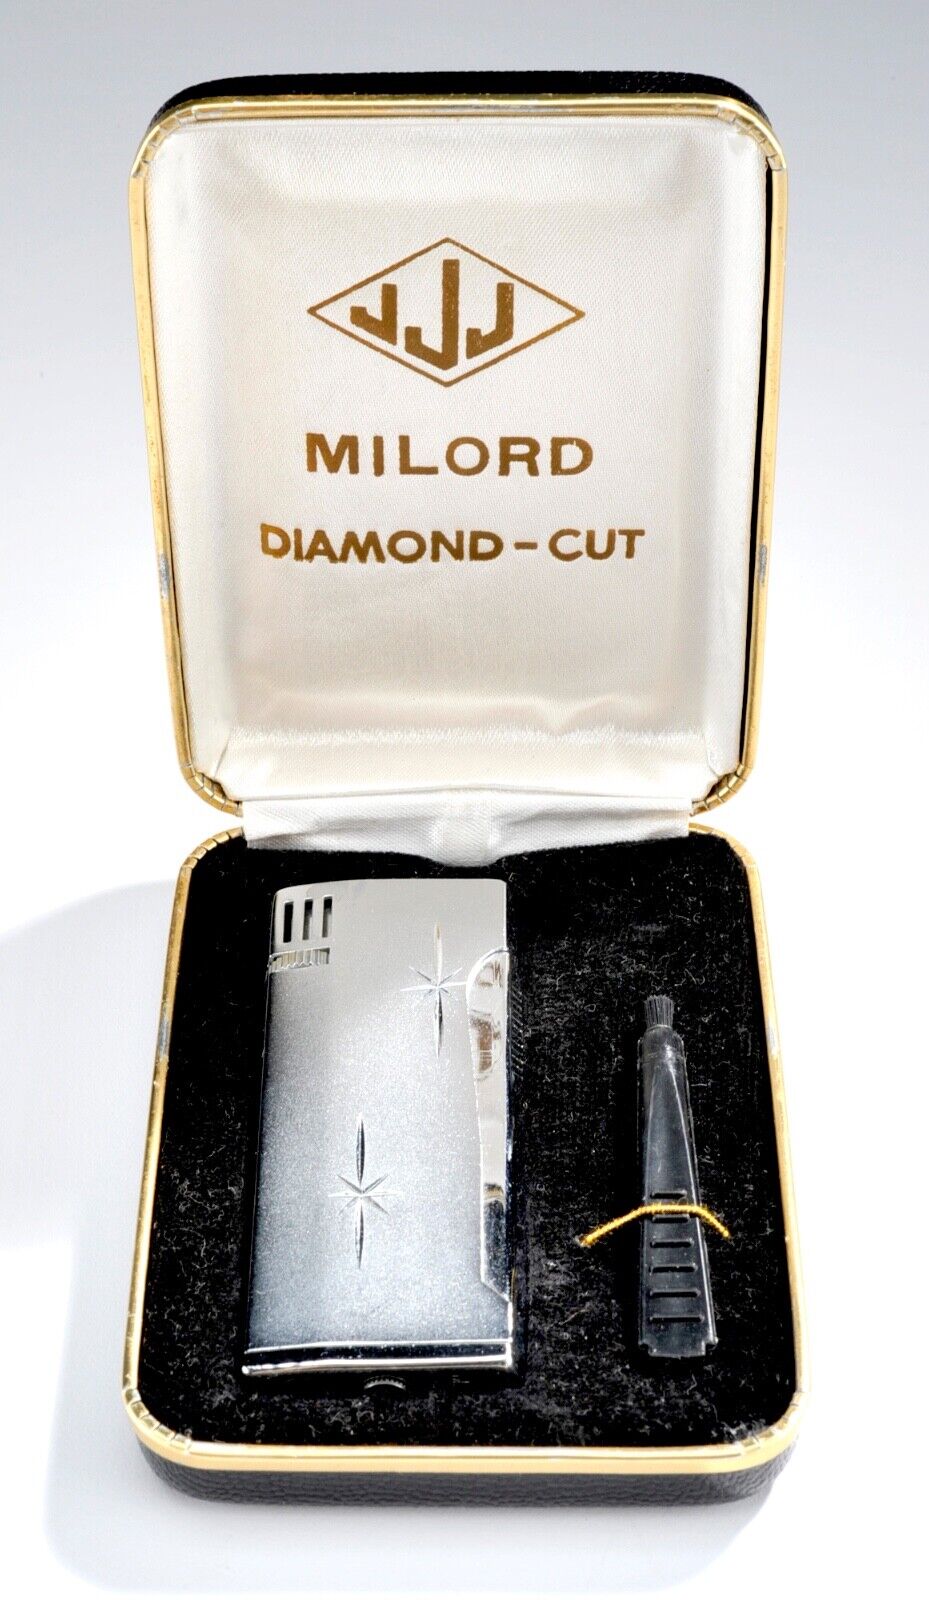 1950-60's MCM Vintage Collectible Silver Tone JJJ Milford Lighter Made In Japan.